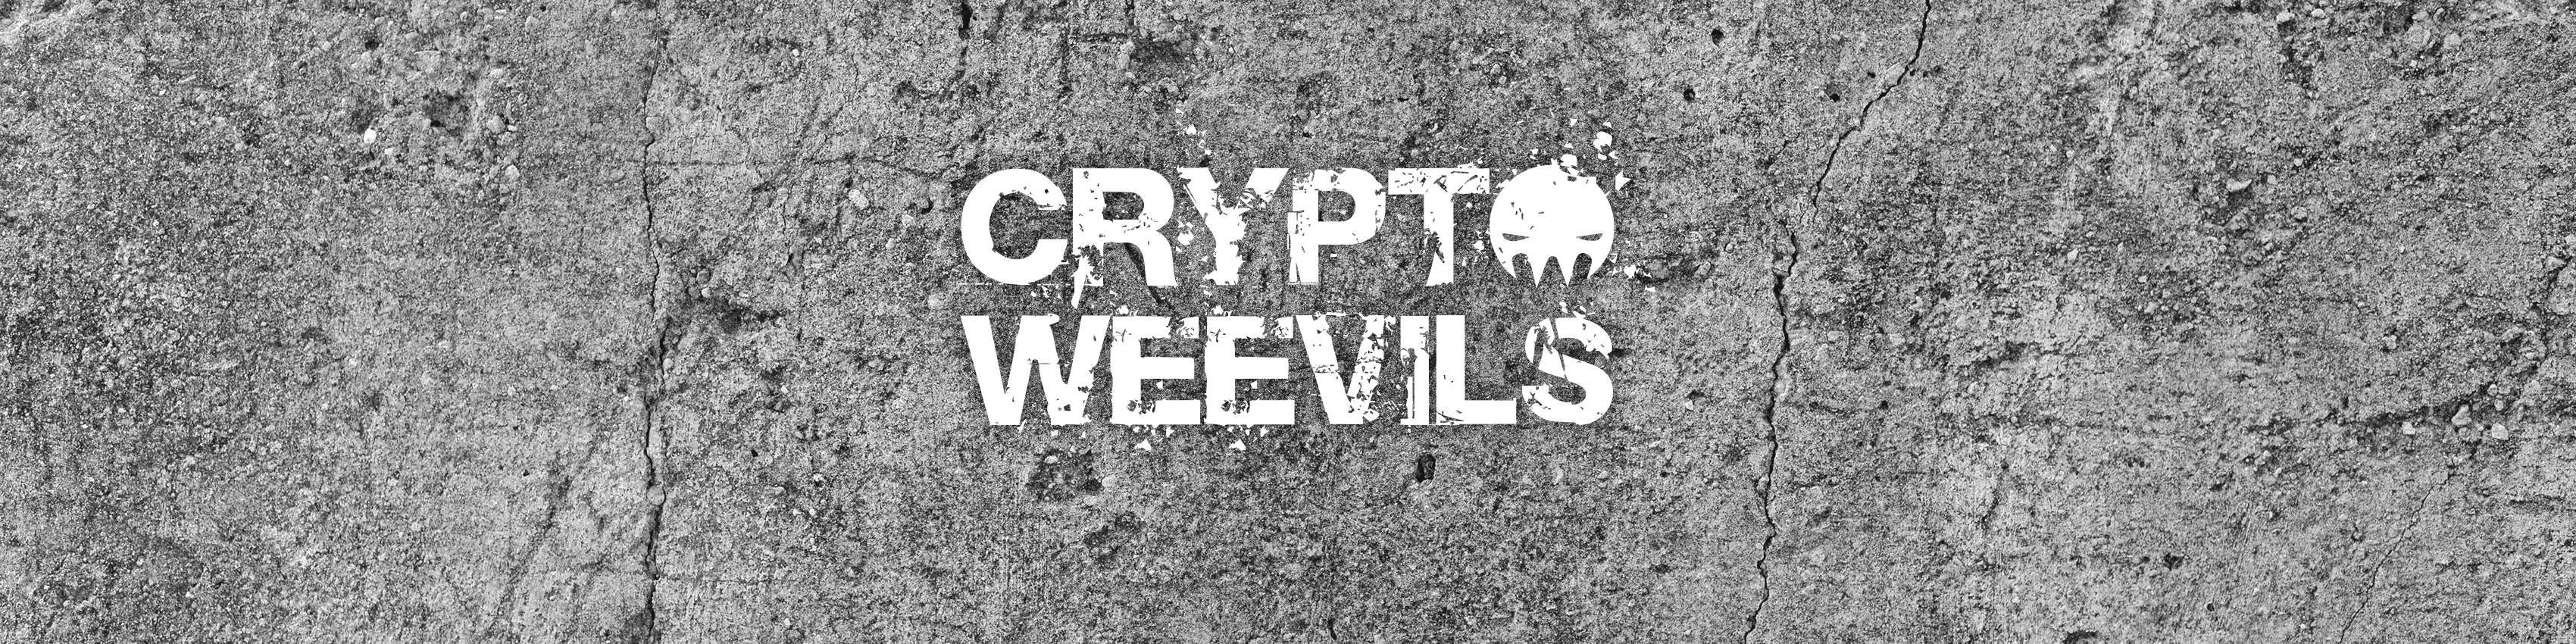 The Crypto Weevils